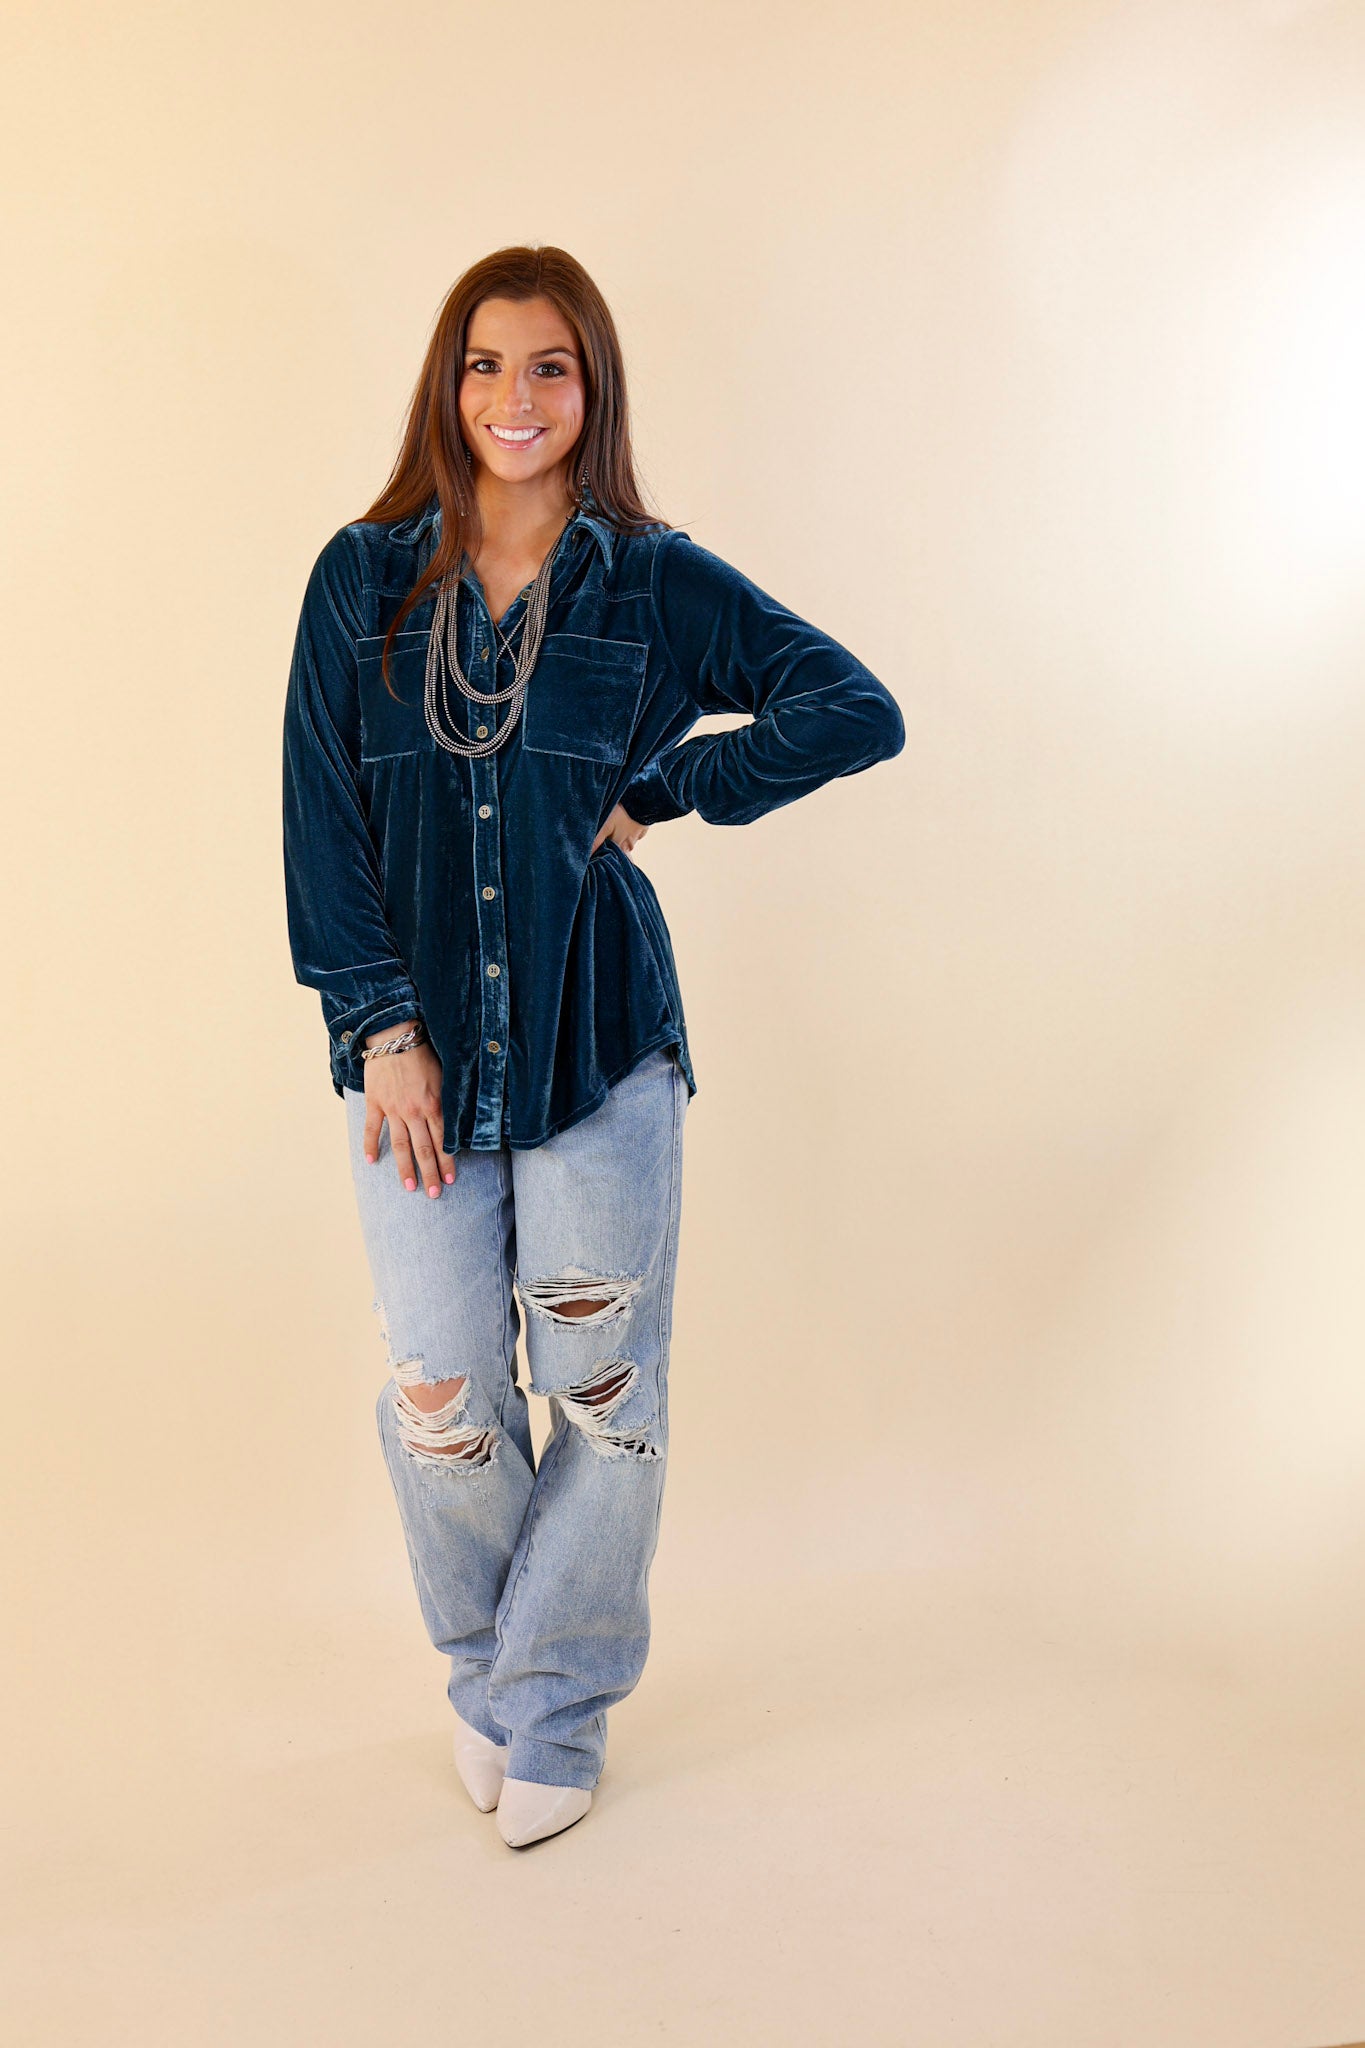 Candy Apple Evening Button Up Velvet Long Sleeve Blouse in Teal Blue - Giddy Up Glamour Boutique